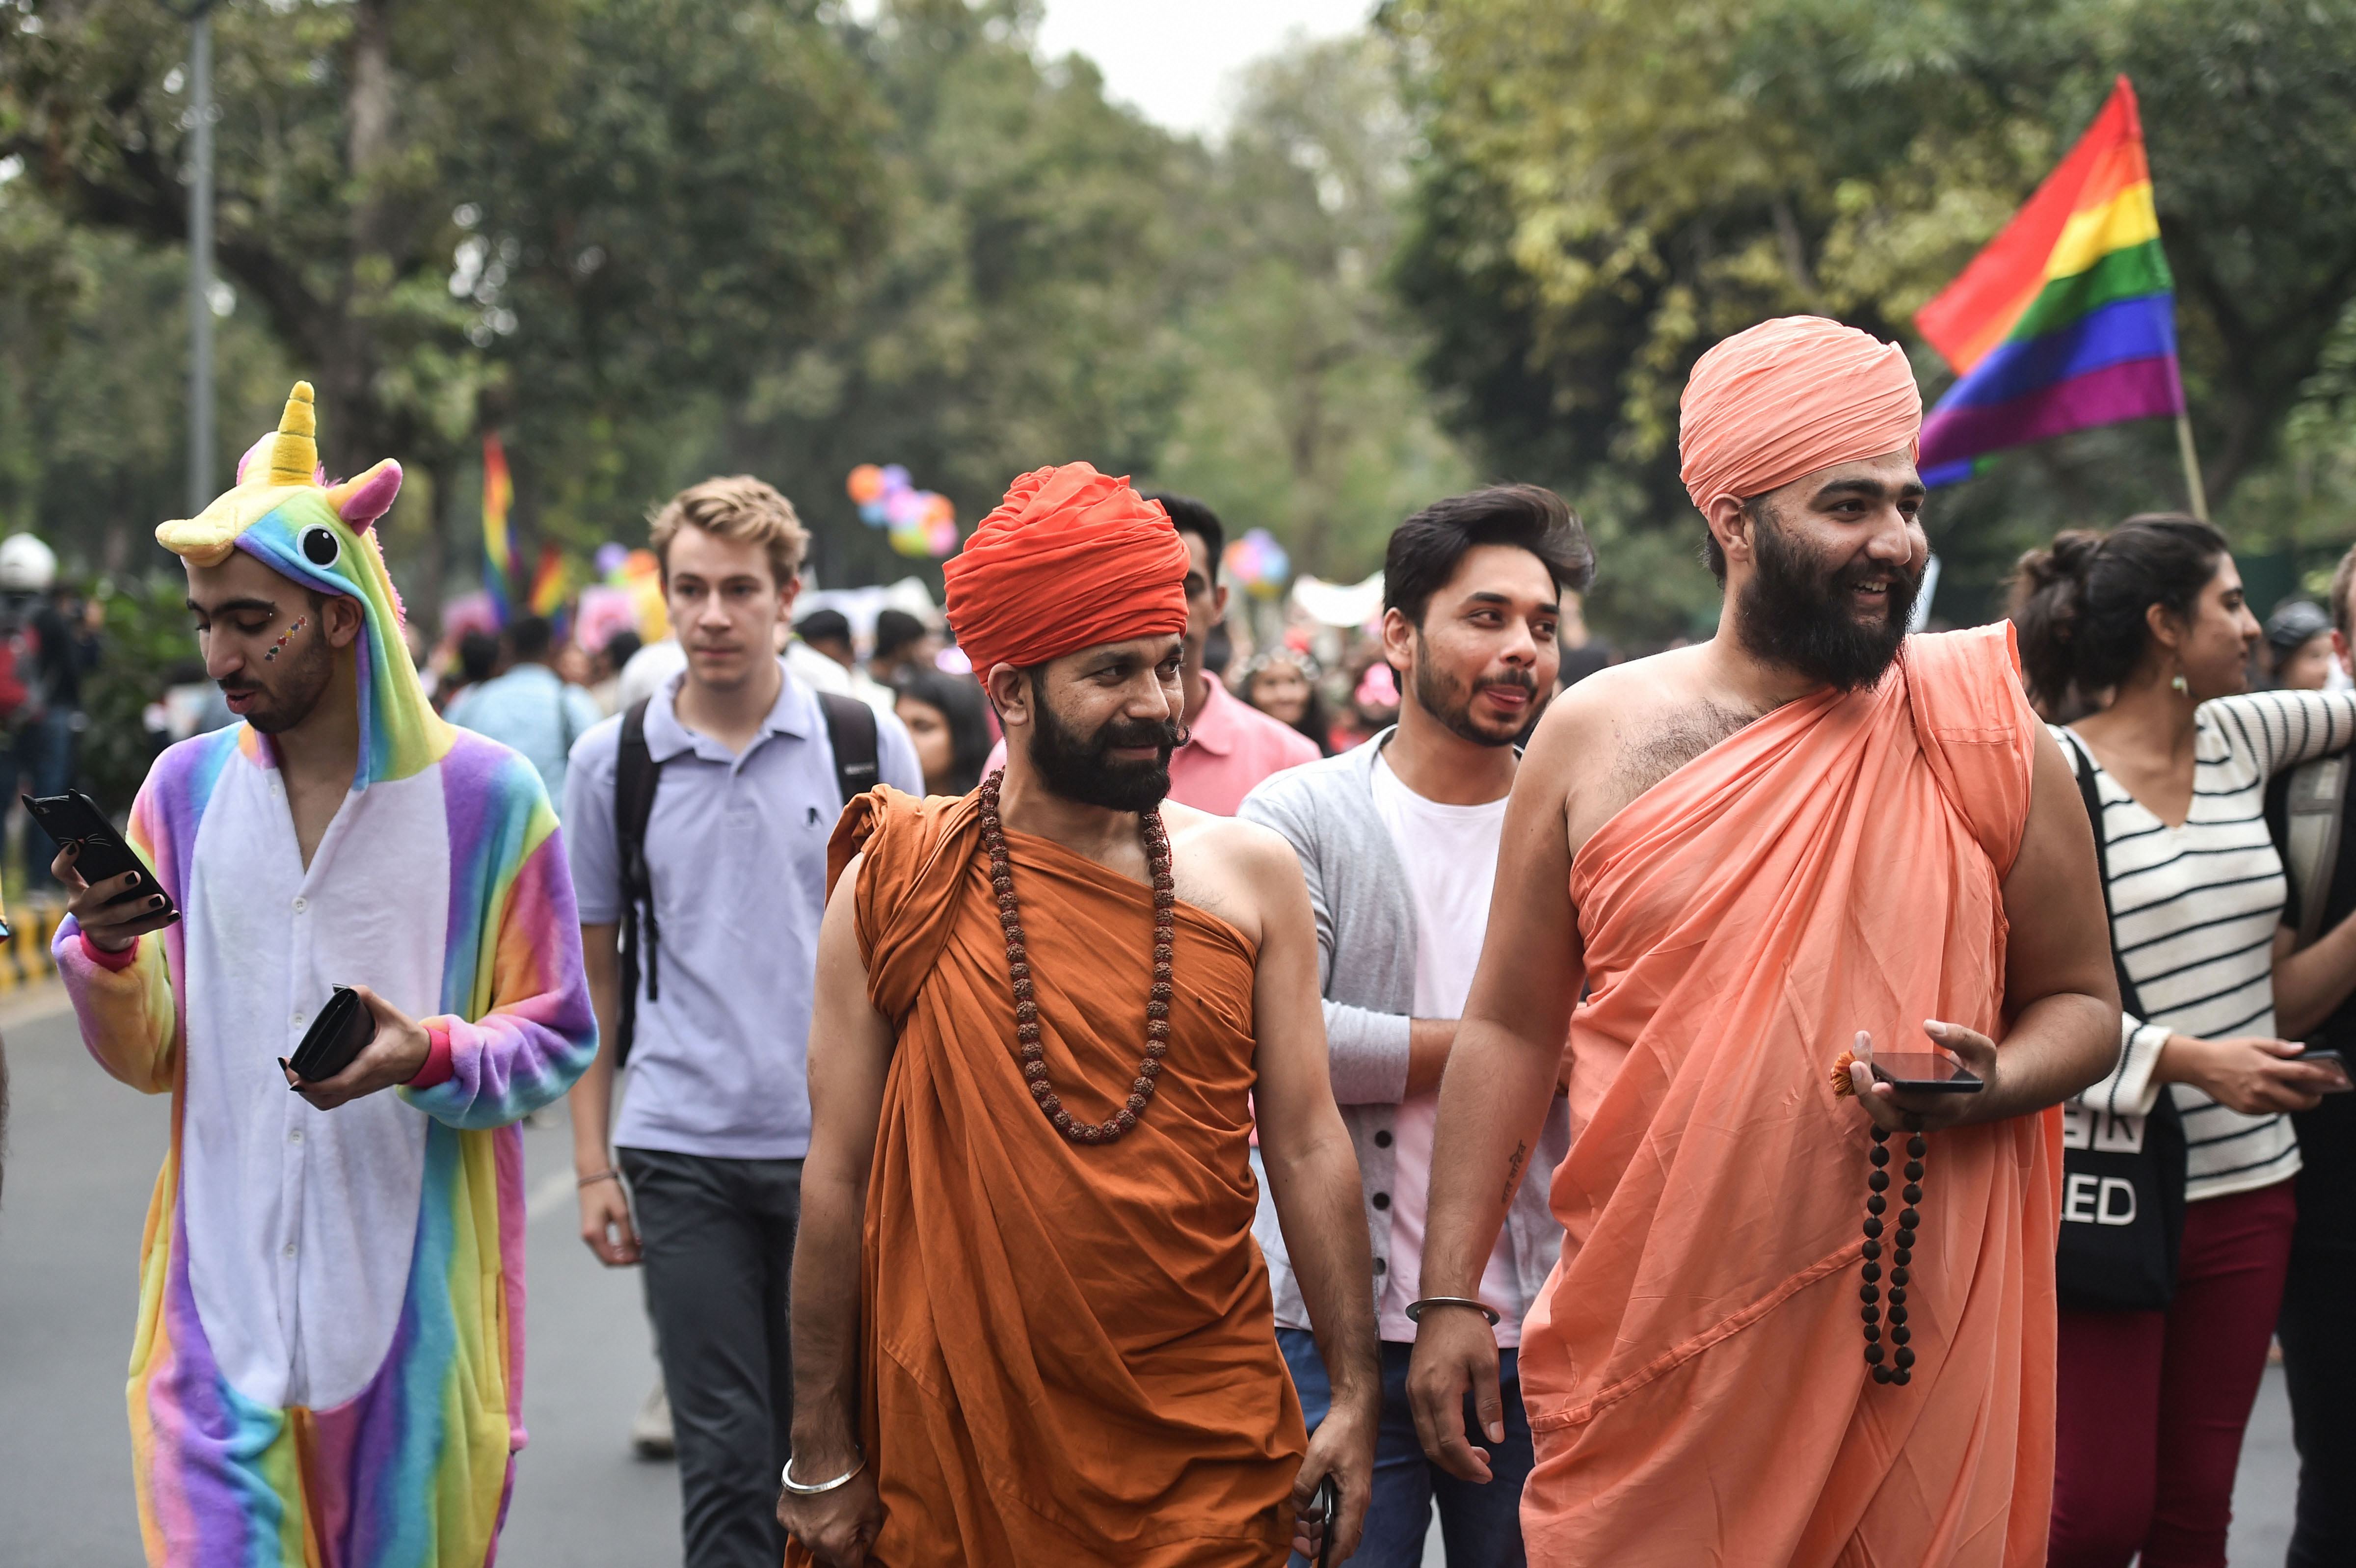 Members of the LGBTQ community and their supporters march during the annual Delhi Queer Pride Parade in New Delhi on Sunday, November 24, 2019.